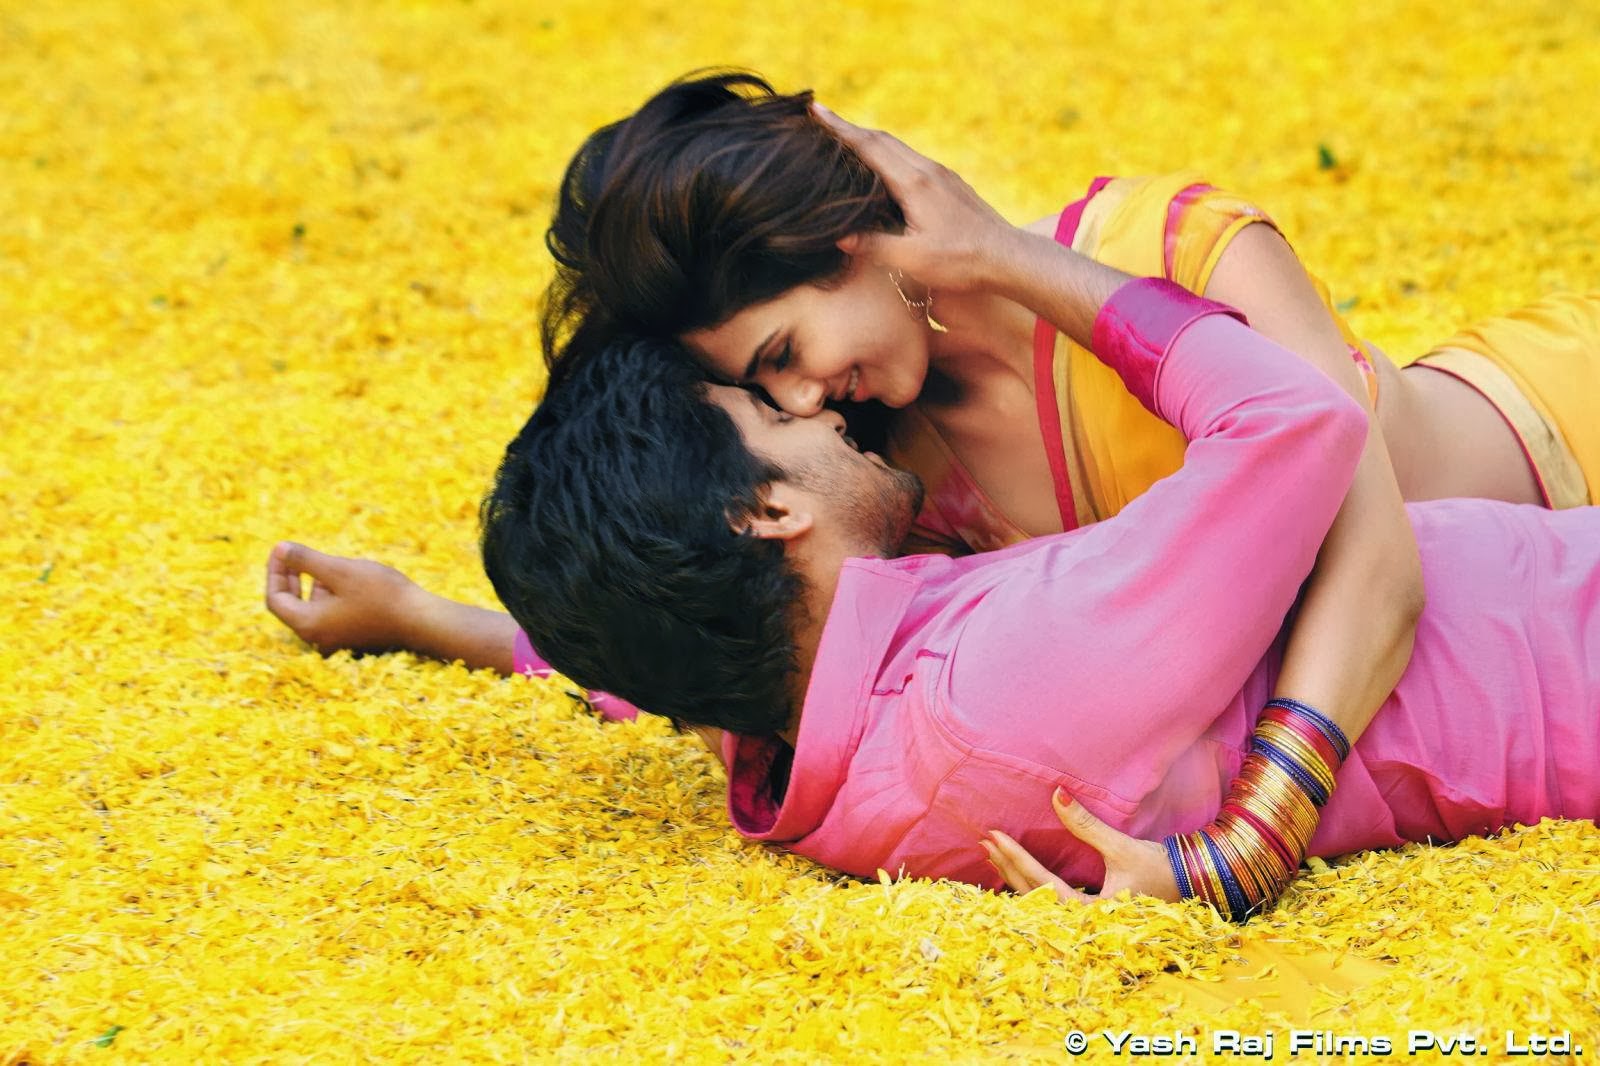 hot lip kiss wallpapers,people in nature,romance,yellow,interaction,fun